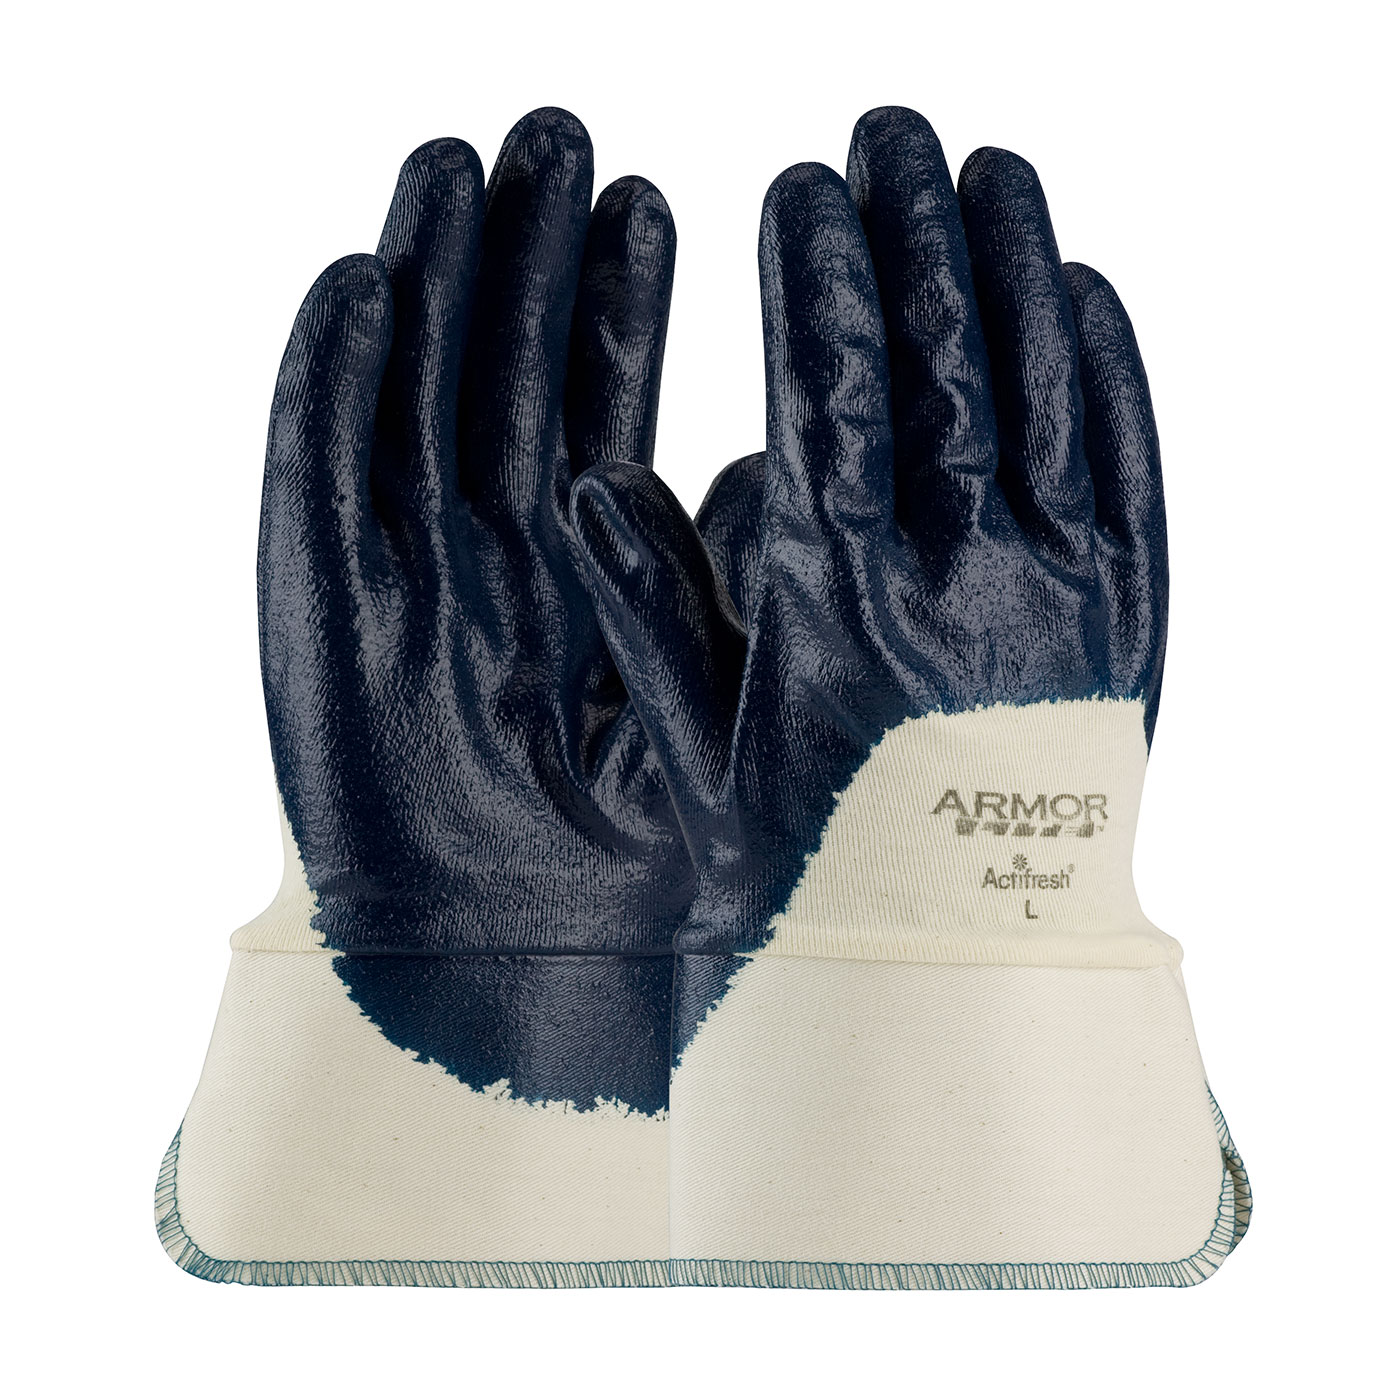 56-3175 PIP® ArmorLite® Nitrile Dipped Glove with Interlock Liner and Textured Finish on Fingers, Palm and Knuckles has a Safety Cuff